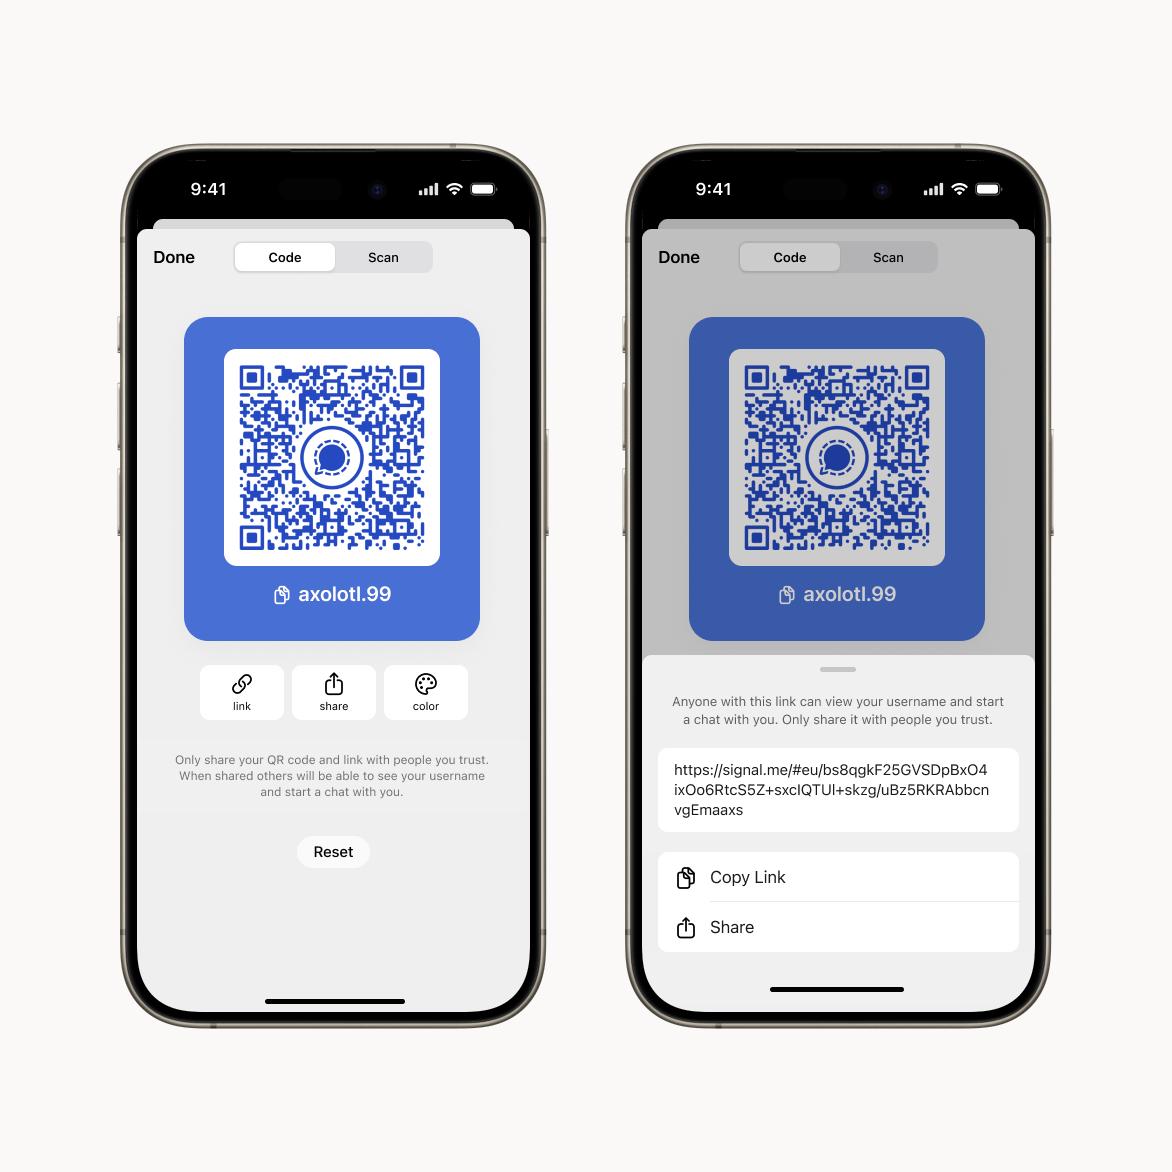 two smartphone screens showing the QR code as part of the user profile and its decoded value which is a URL